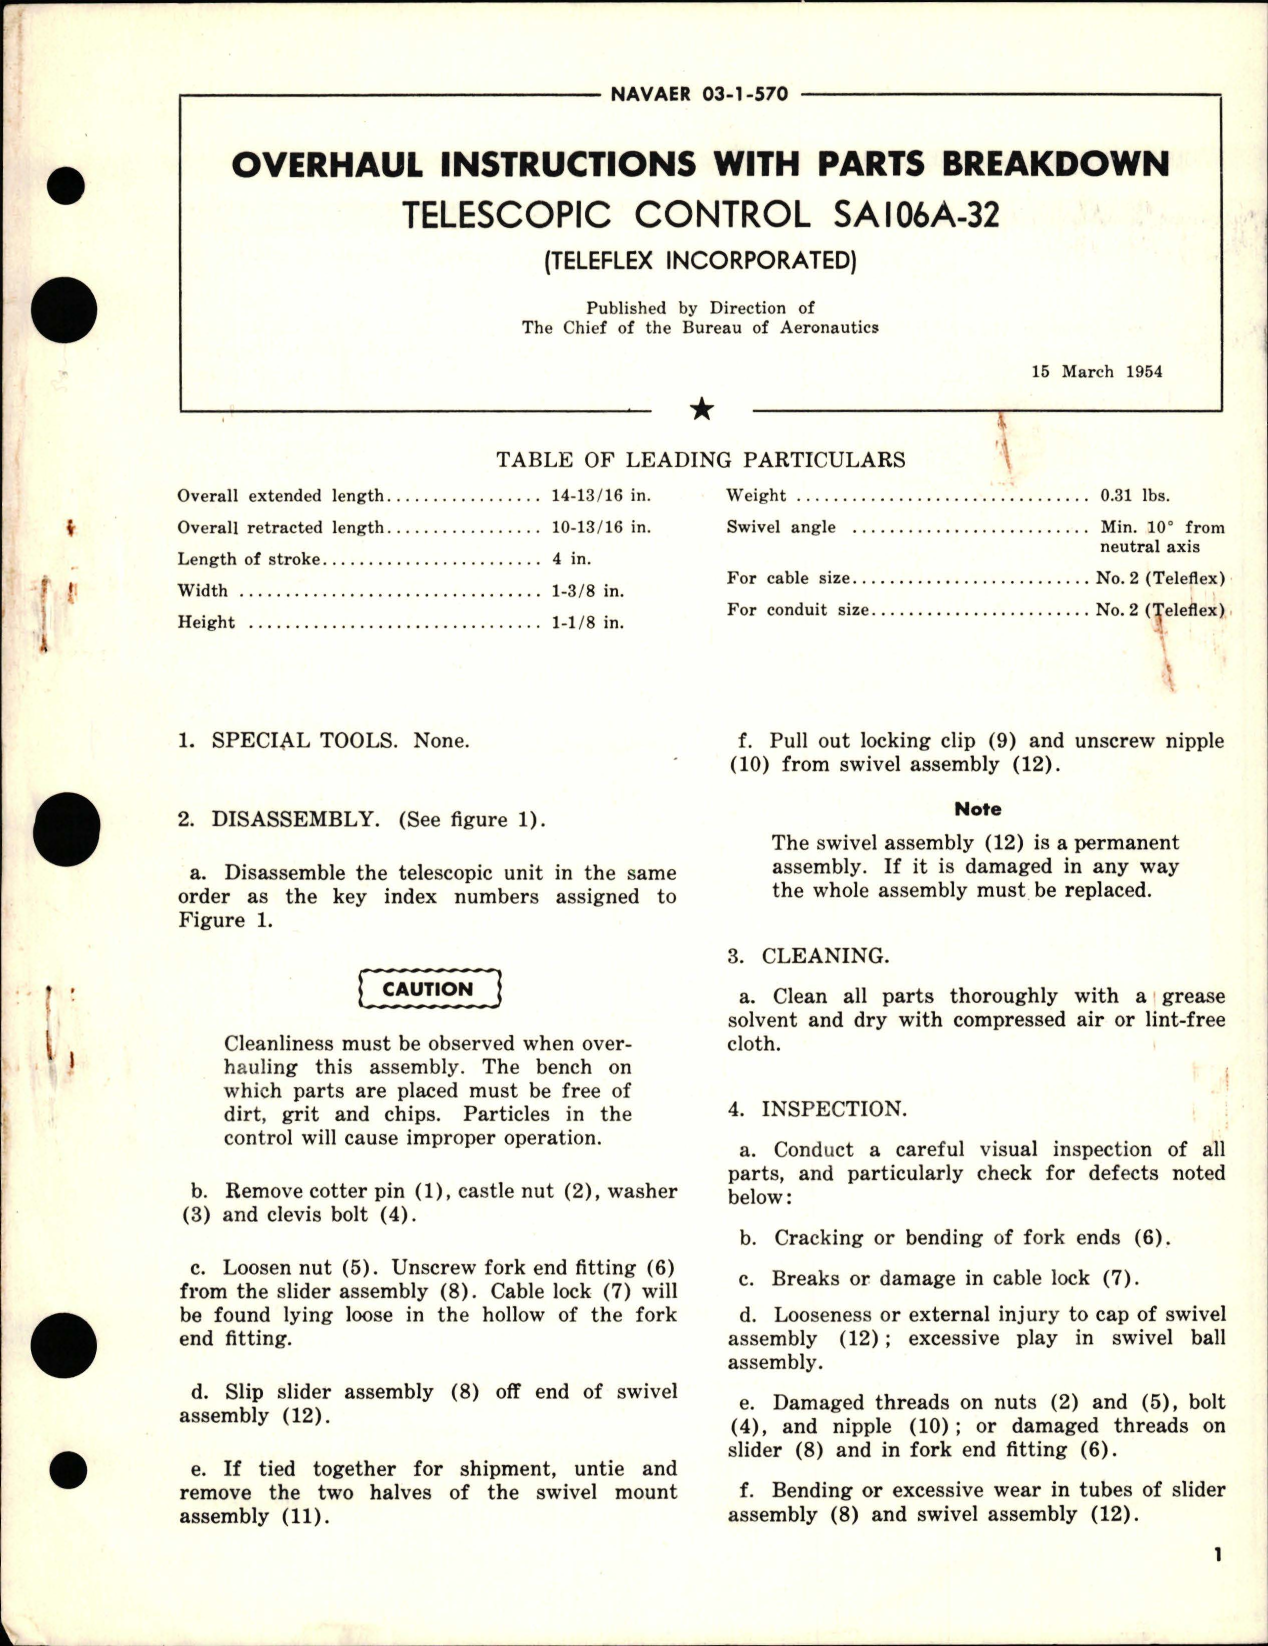 Sample page 1 from AirCorps Library document: Overhaul Instructions with Parts Breakdown for Telescopic Control - SA106A-32